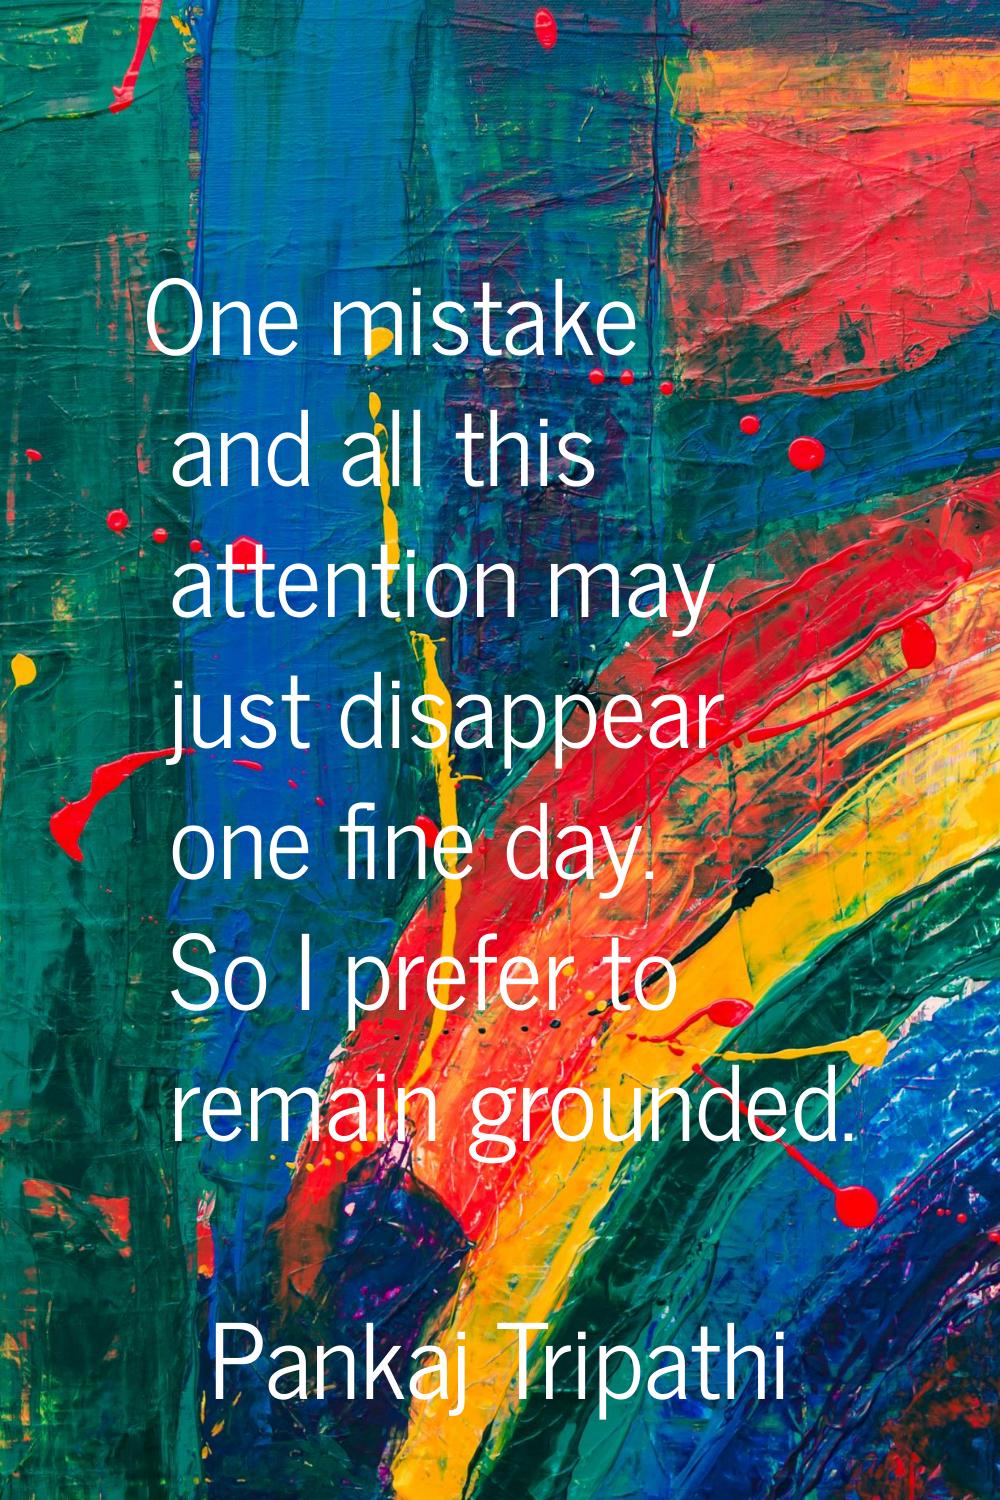 One mistake and all this attention may just disappear one fine day. So I prefer to remain grounded.